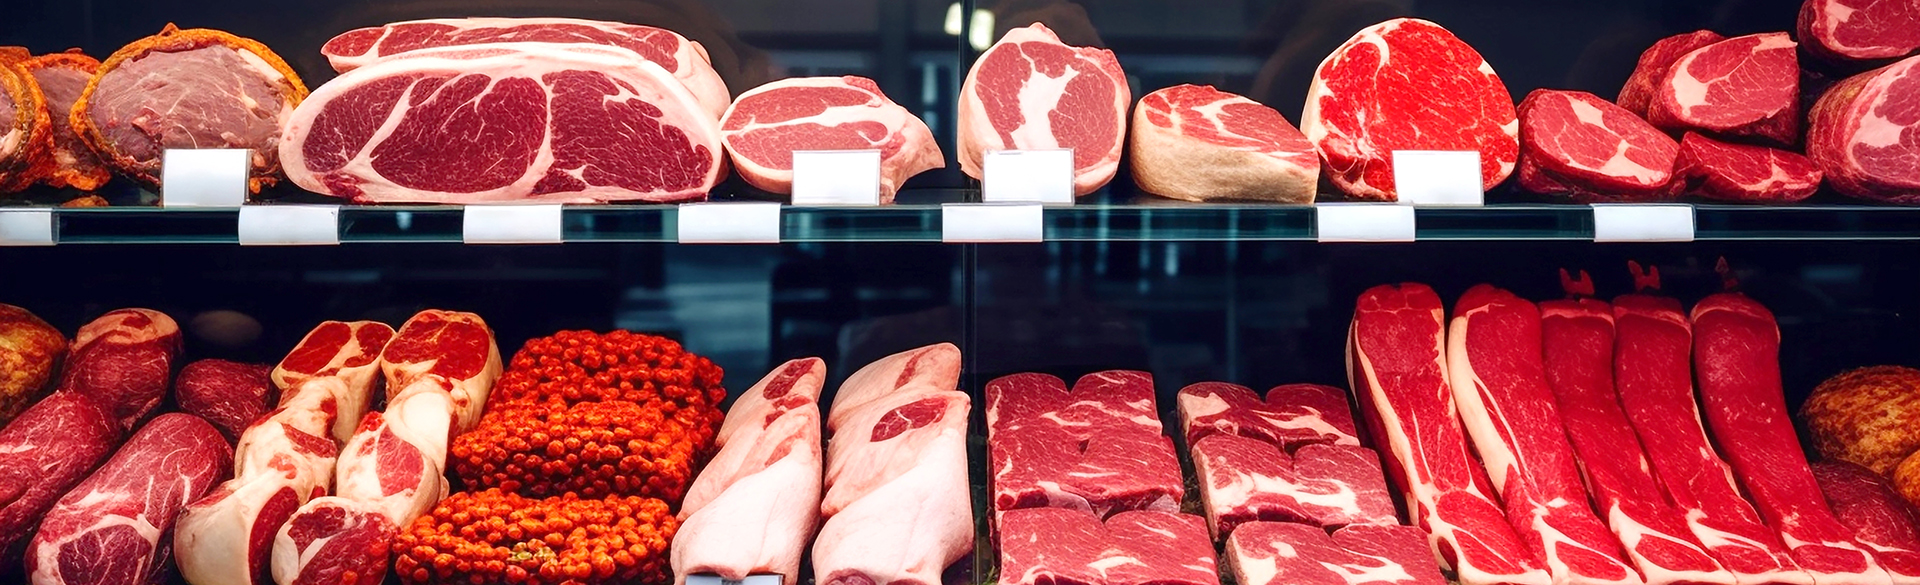 display of different cuts of red meats